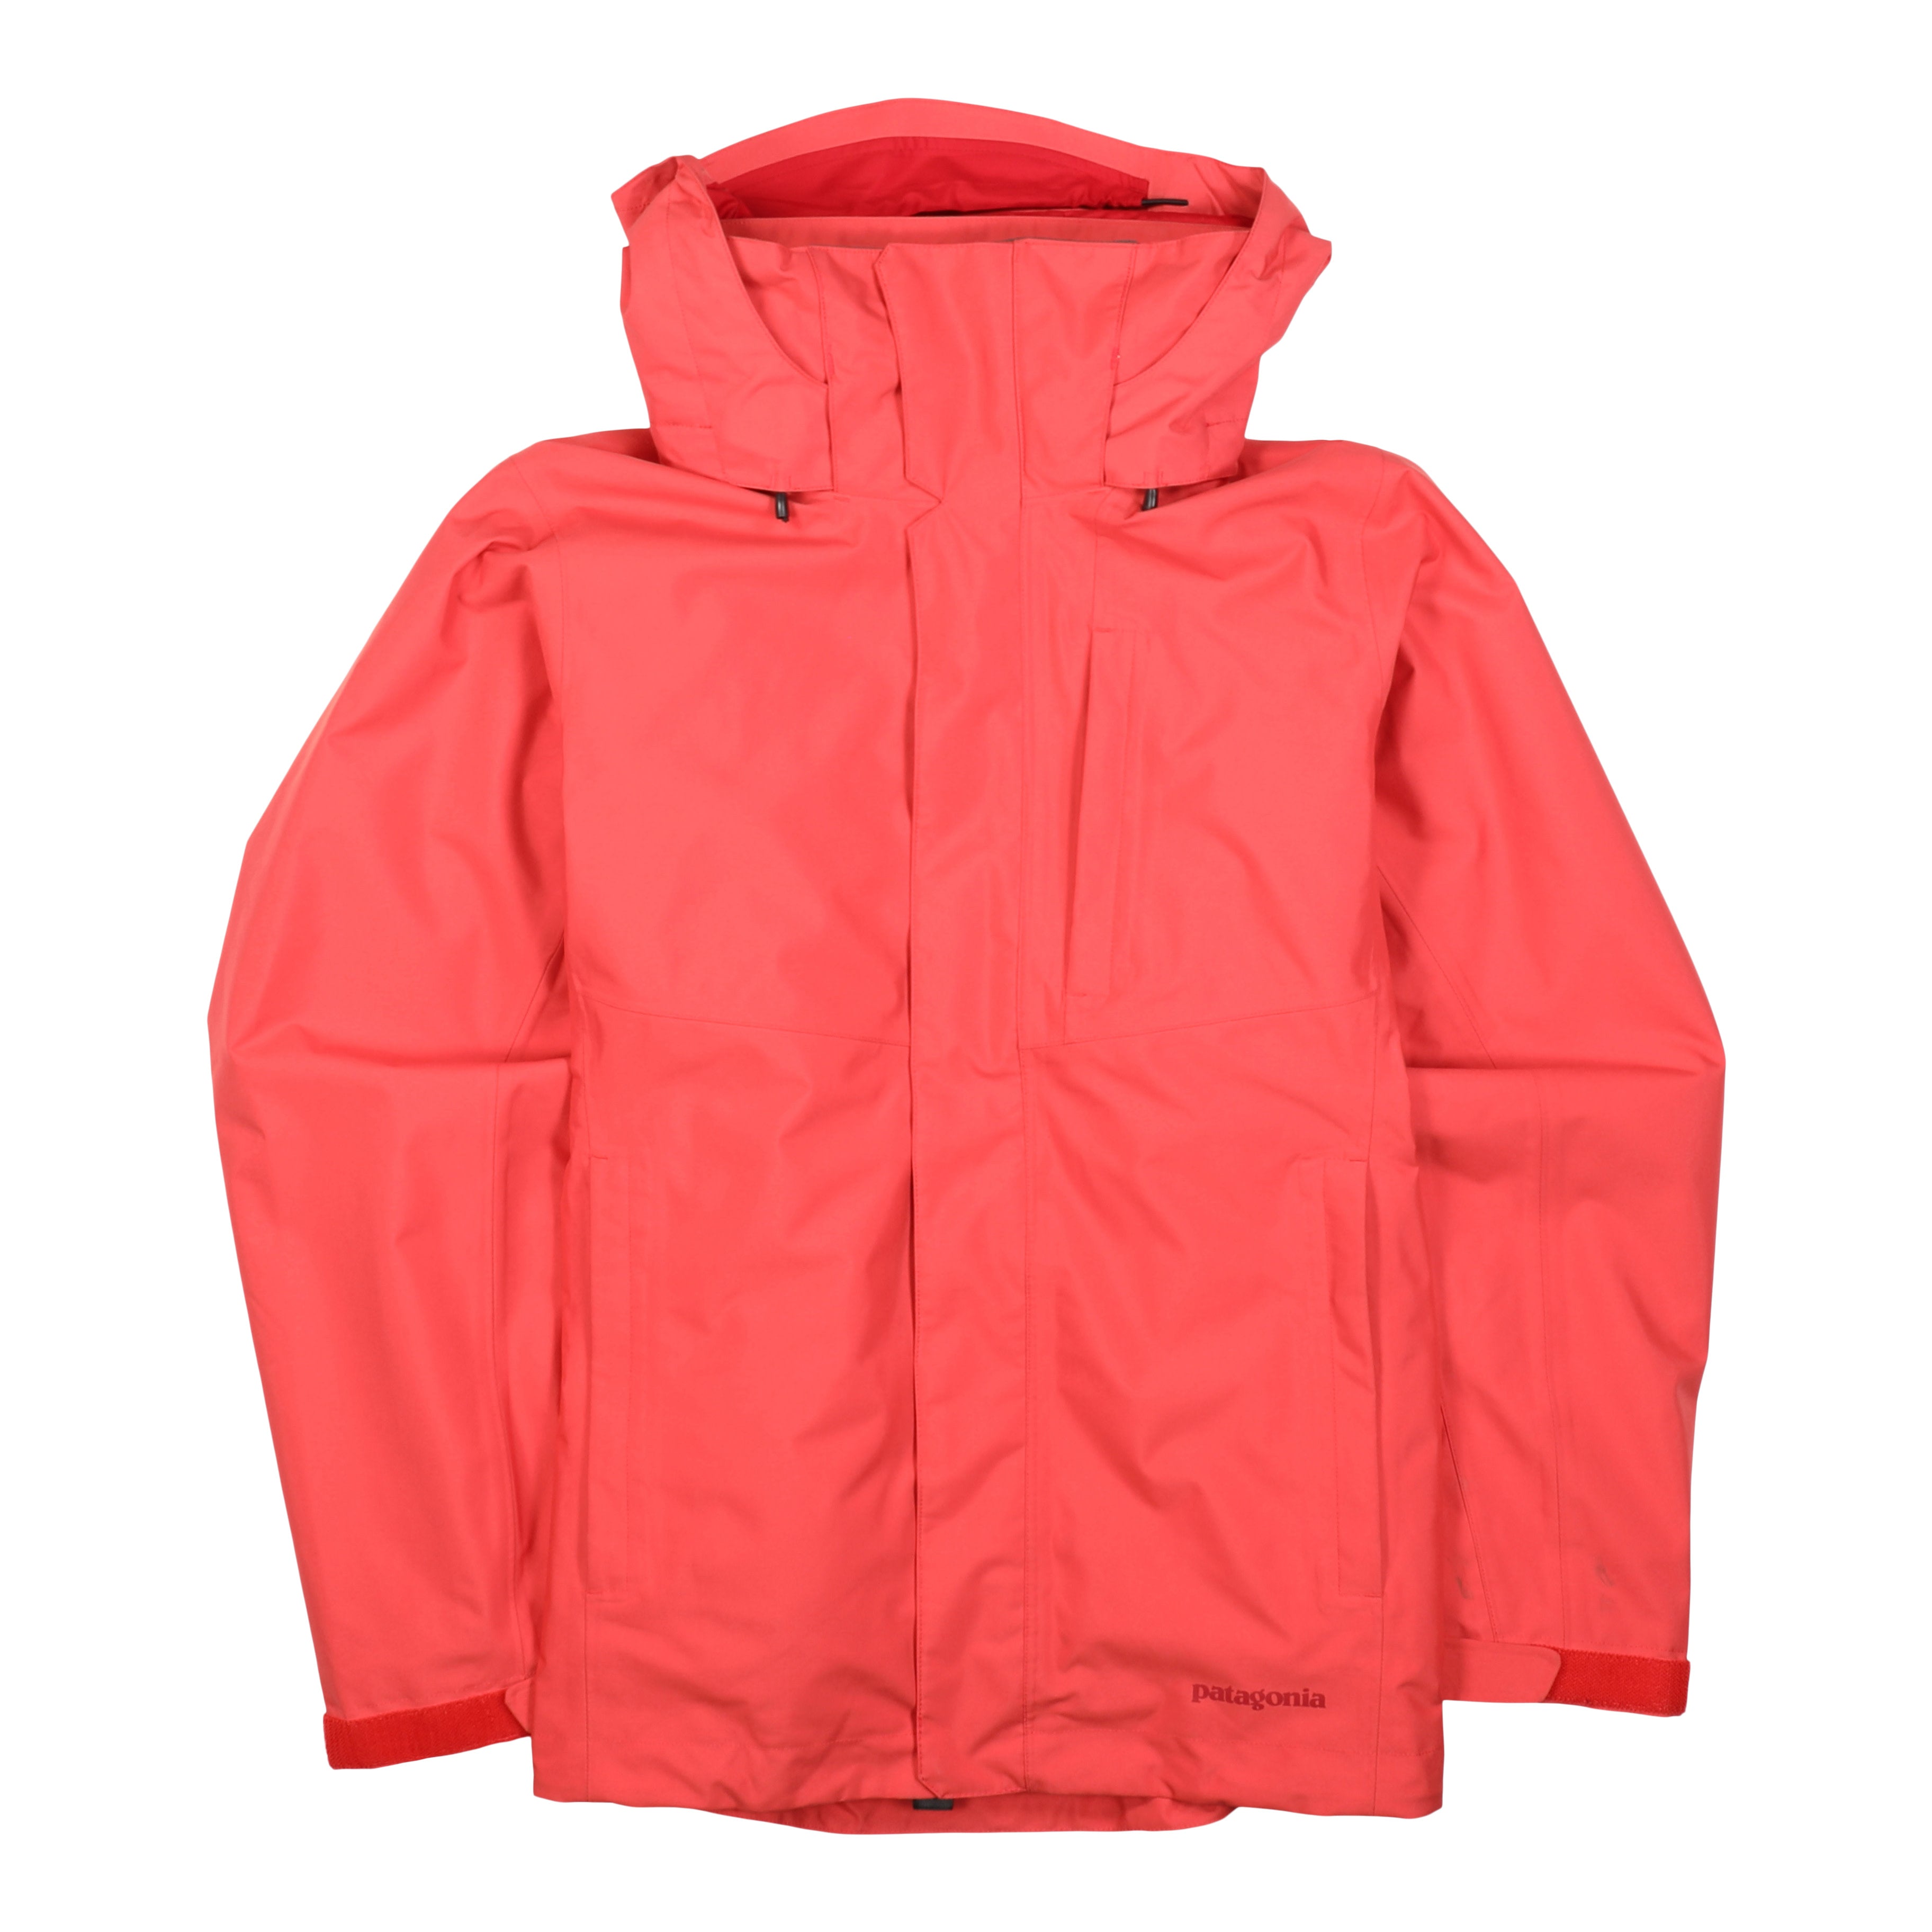 Patagonia Women's Recco 3 in 1 Snowbelle Reversible Insulated